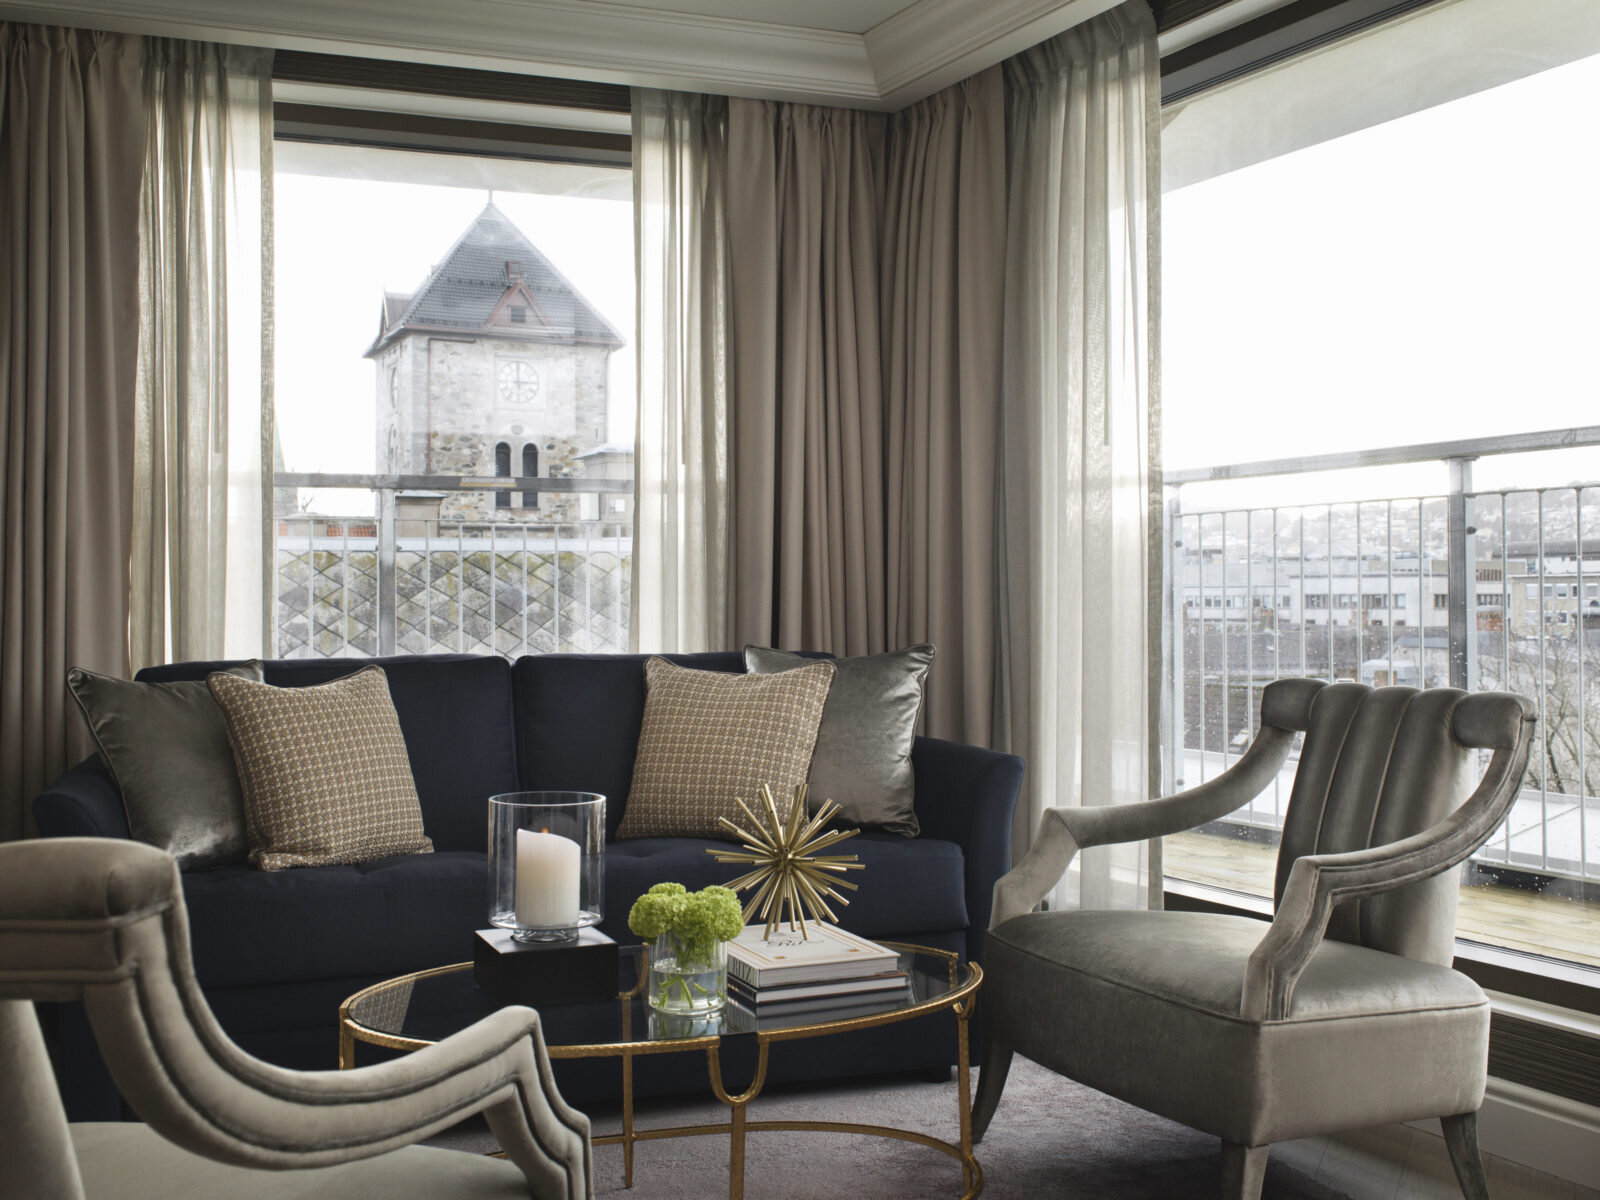 Executive and Deluxe Suite Offerings at the Brittania Hotel in Trondheim, Norway